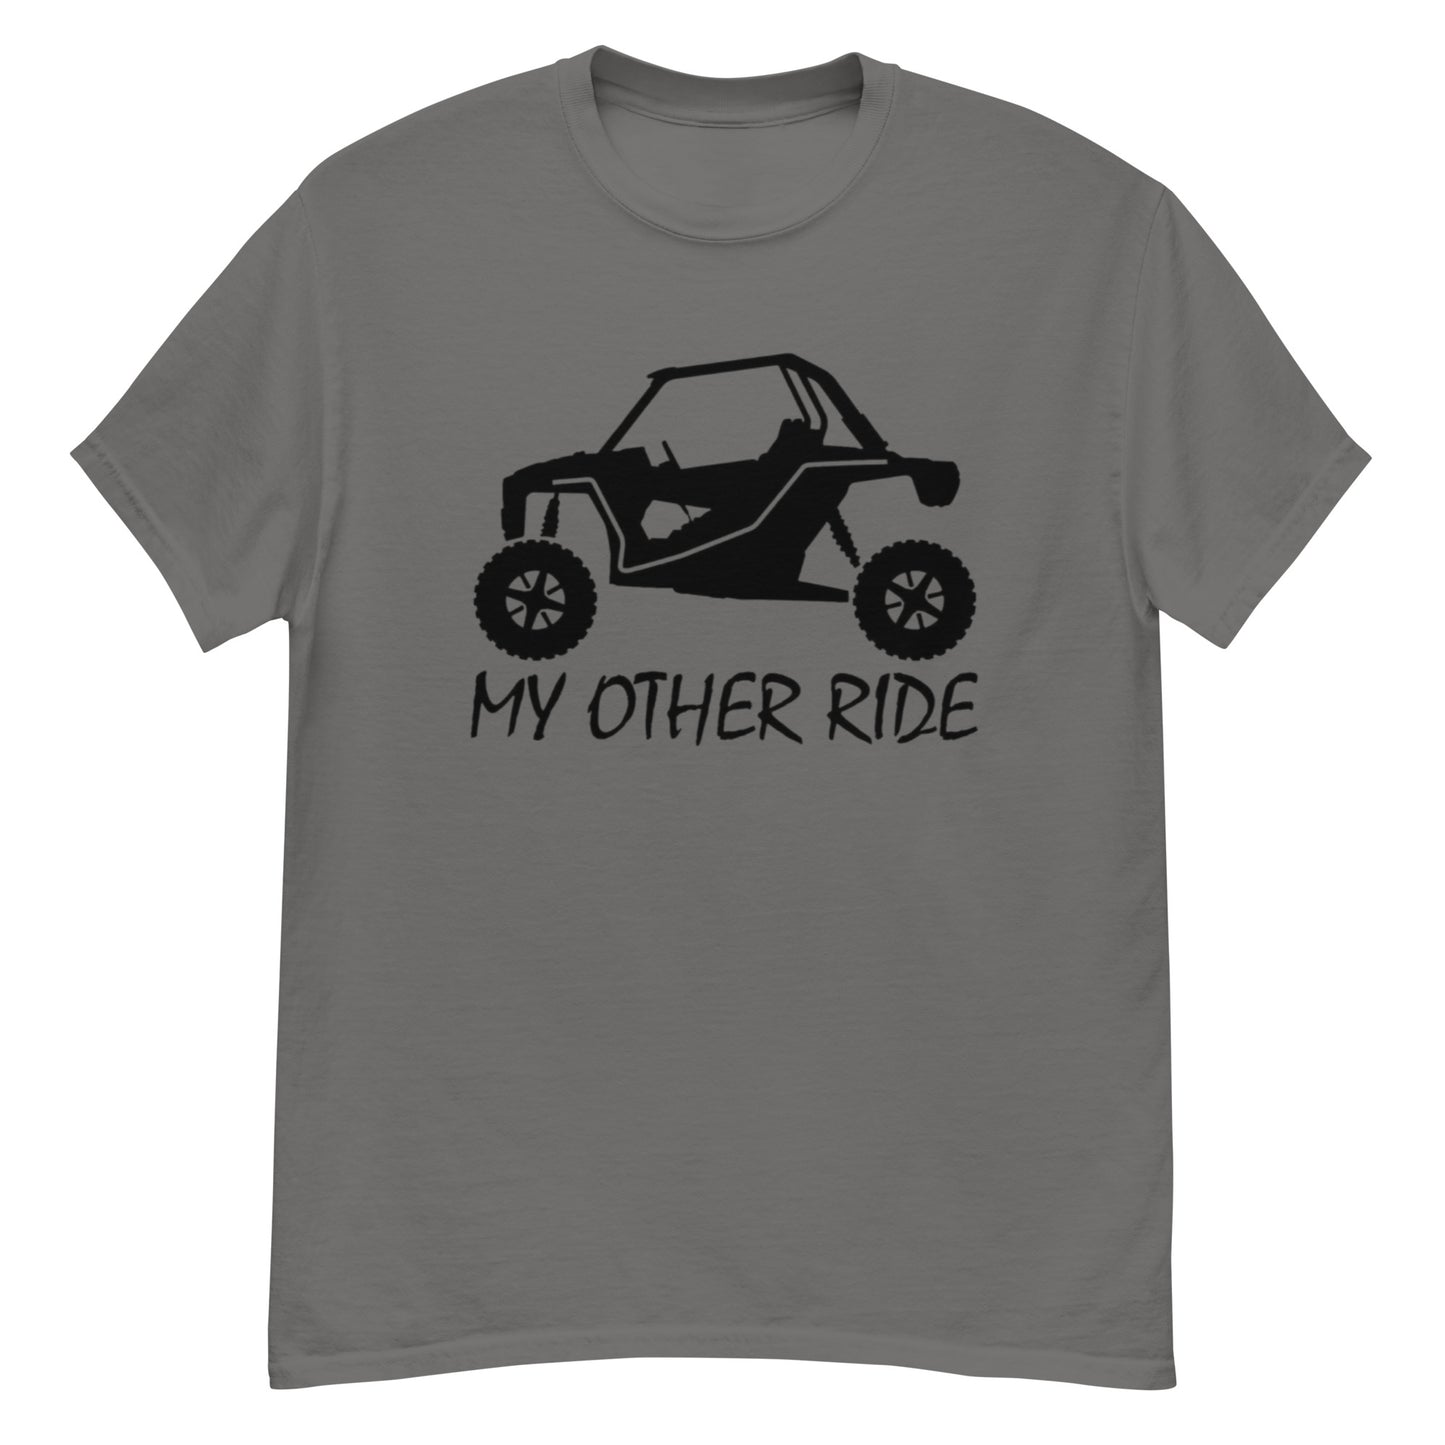 My Other Ride unisex classic tee